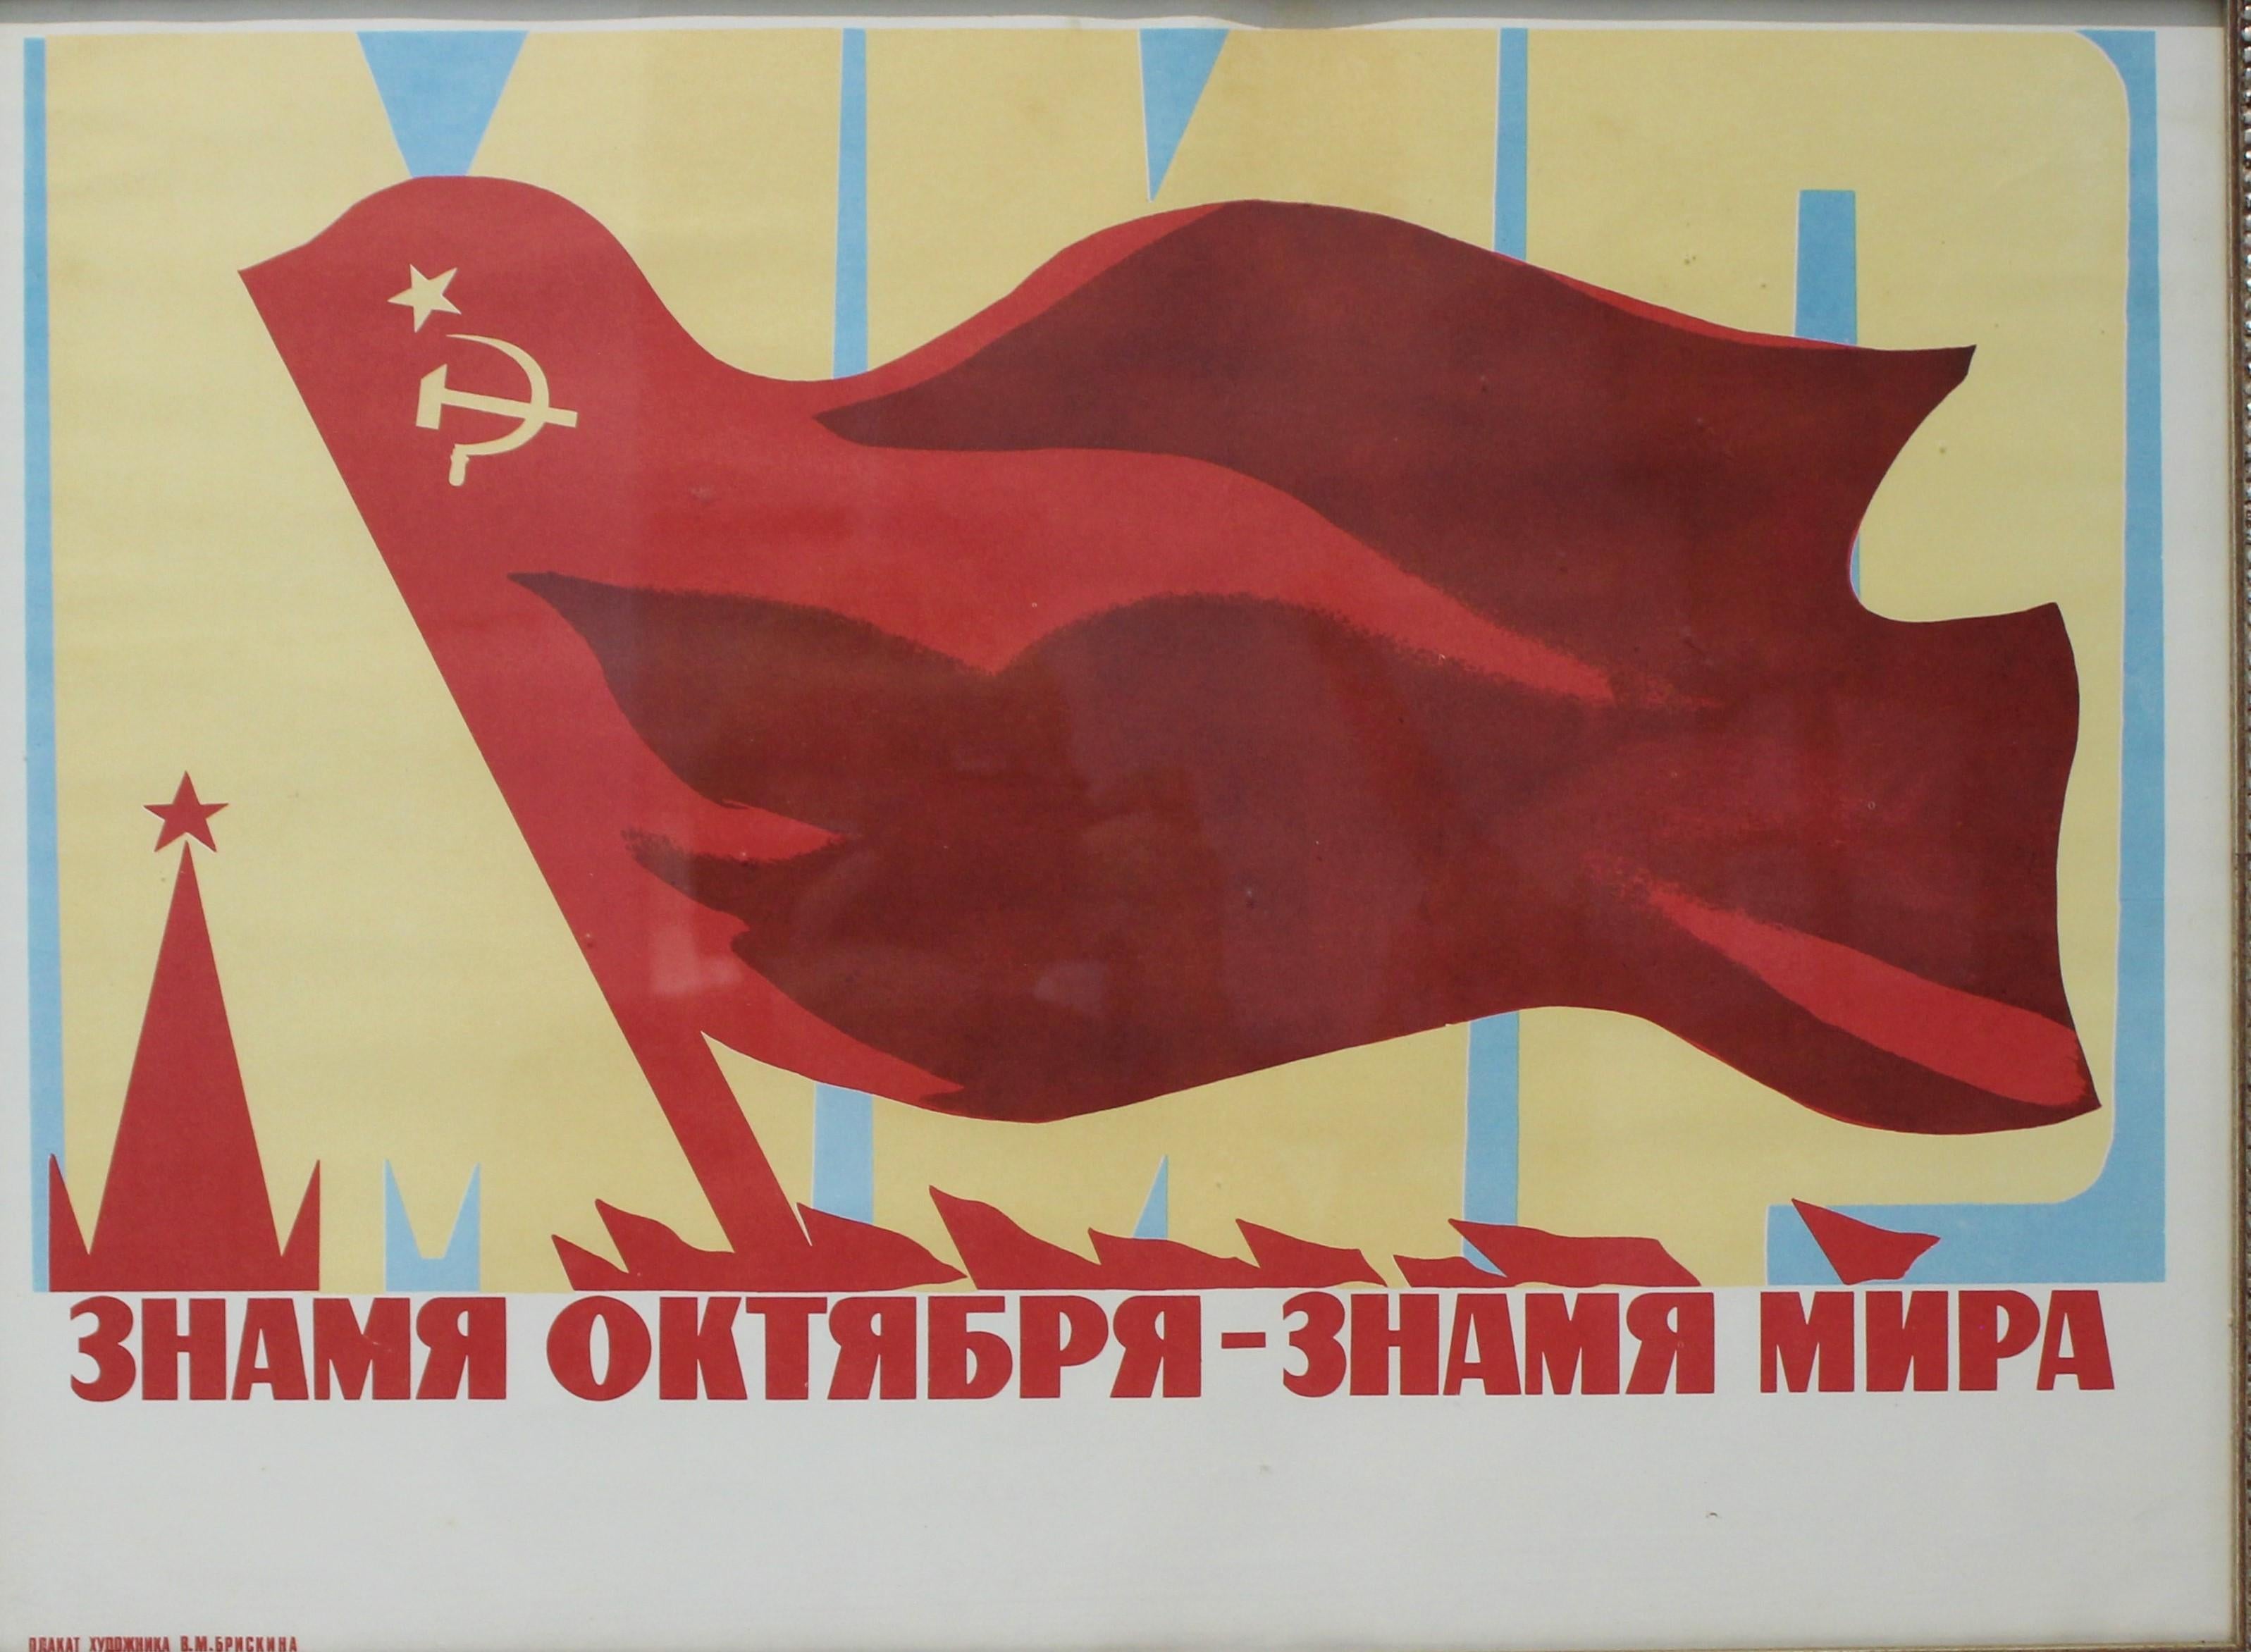 This piece packs a lot of punch with its bold graphics and use of colors to help promote the Soviet cause of the 1970s.

Translation:
